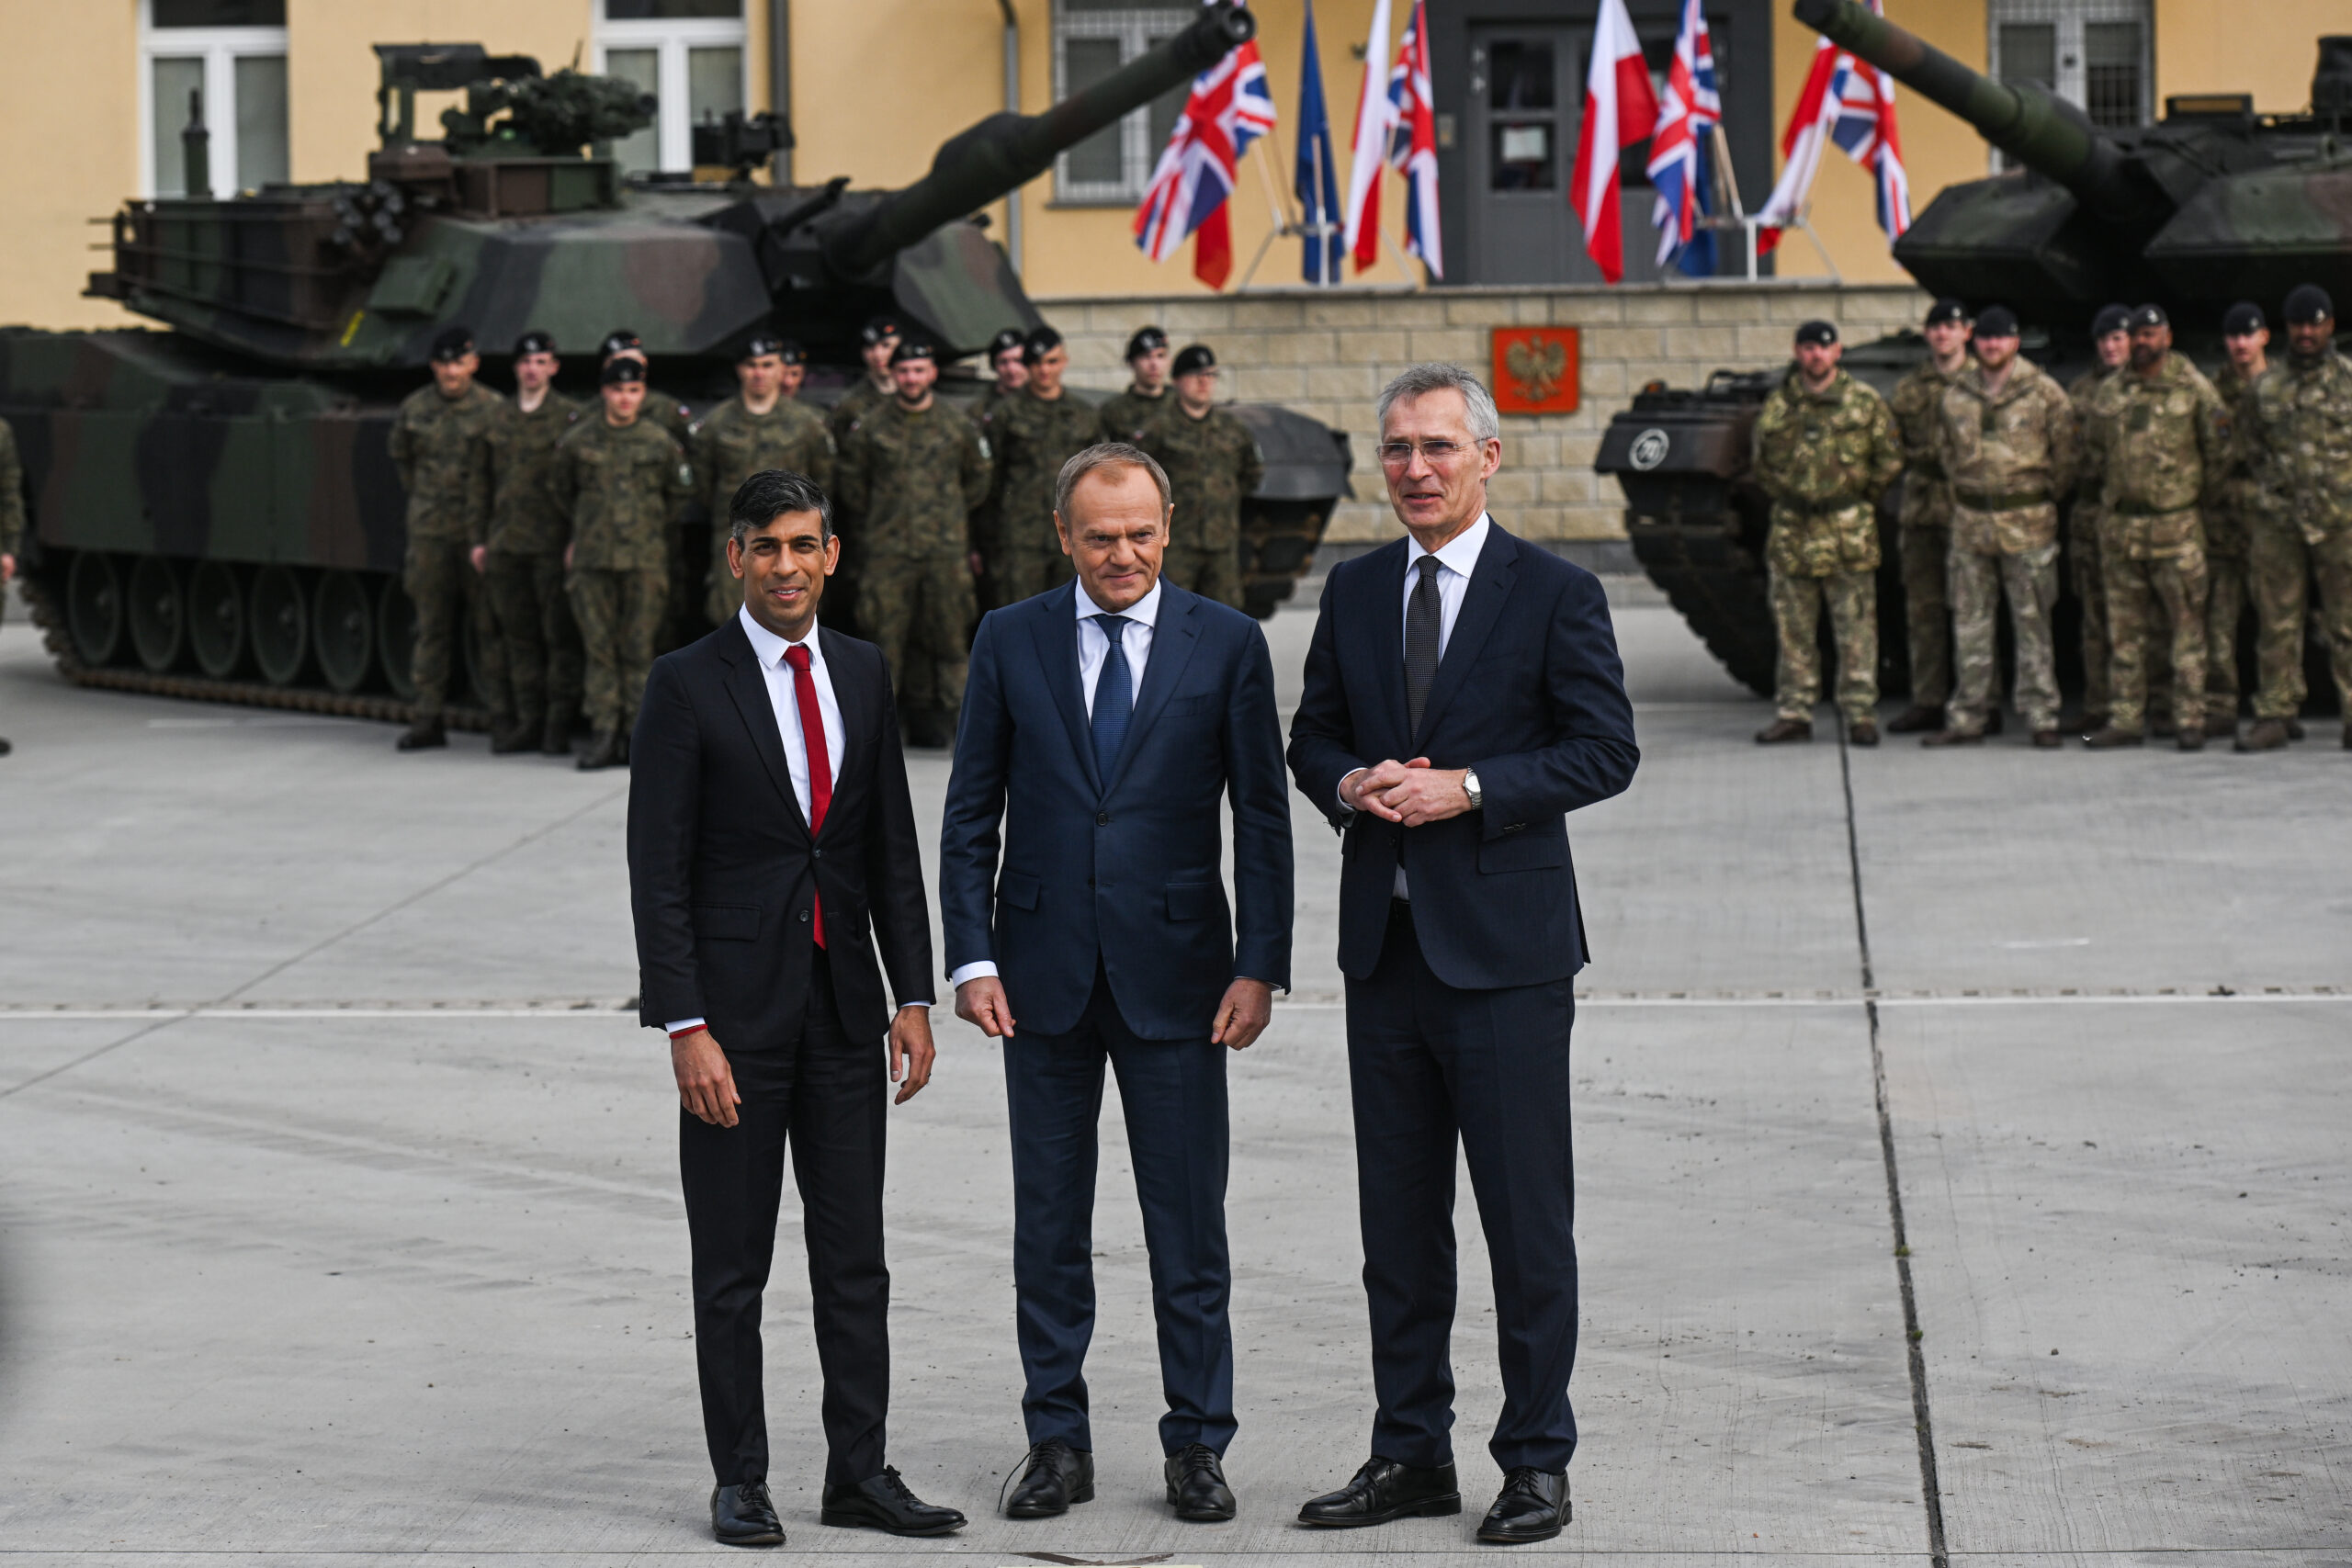 Polish Prime Minister Donald Tusk (center), NATO Secretary General Jens Stoltenberg (right), and British Prime Minister Rishi Sunak (left) ahead of a meeting with troops at the 1st Warsaw Armoured Brigade in Warsaw, Poland, on April 23, 2024. <em>Photo by Omar Marques/Getty Images</em>